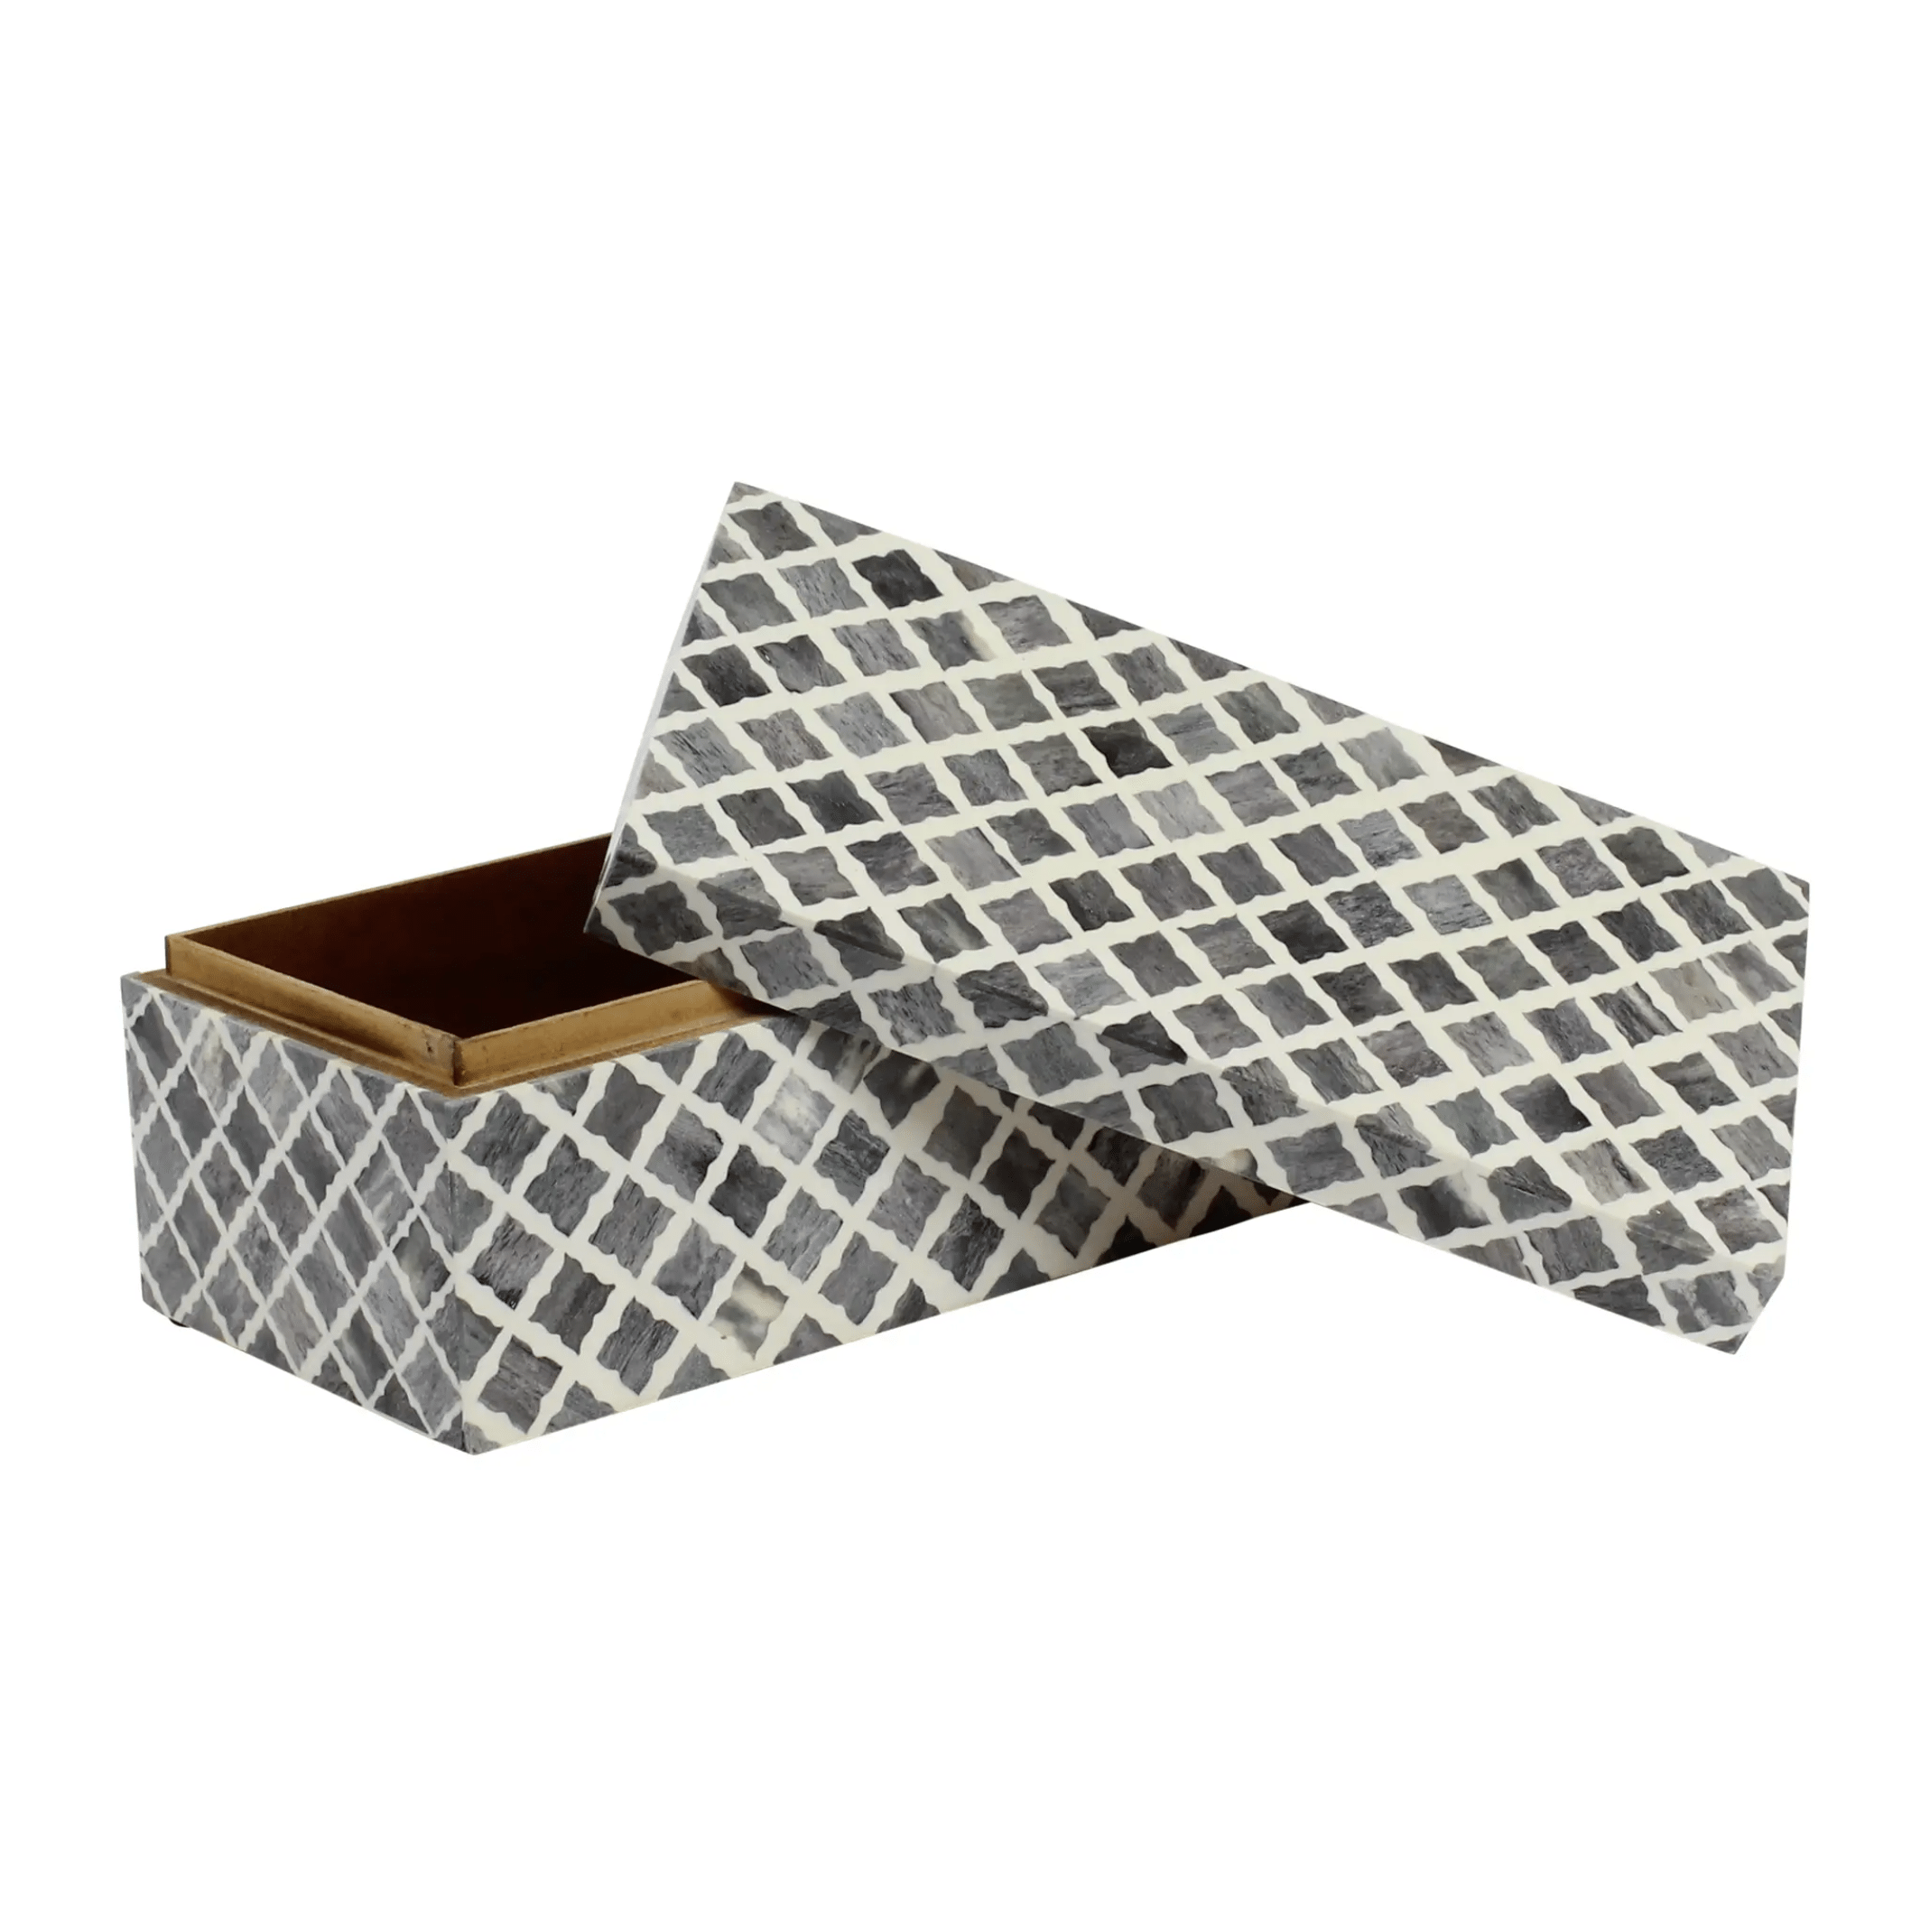 Stylish grey and white bone inlay box home decor and accessories for your coffee table and dining room grey and white wood bone